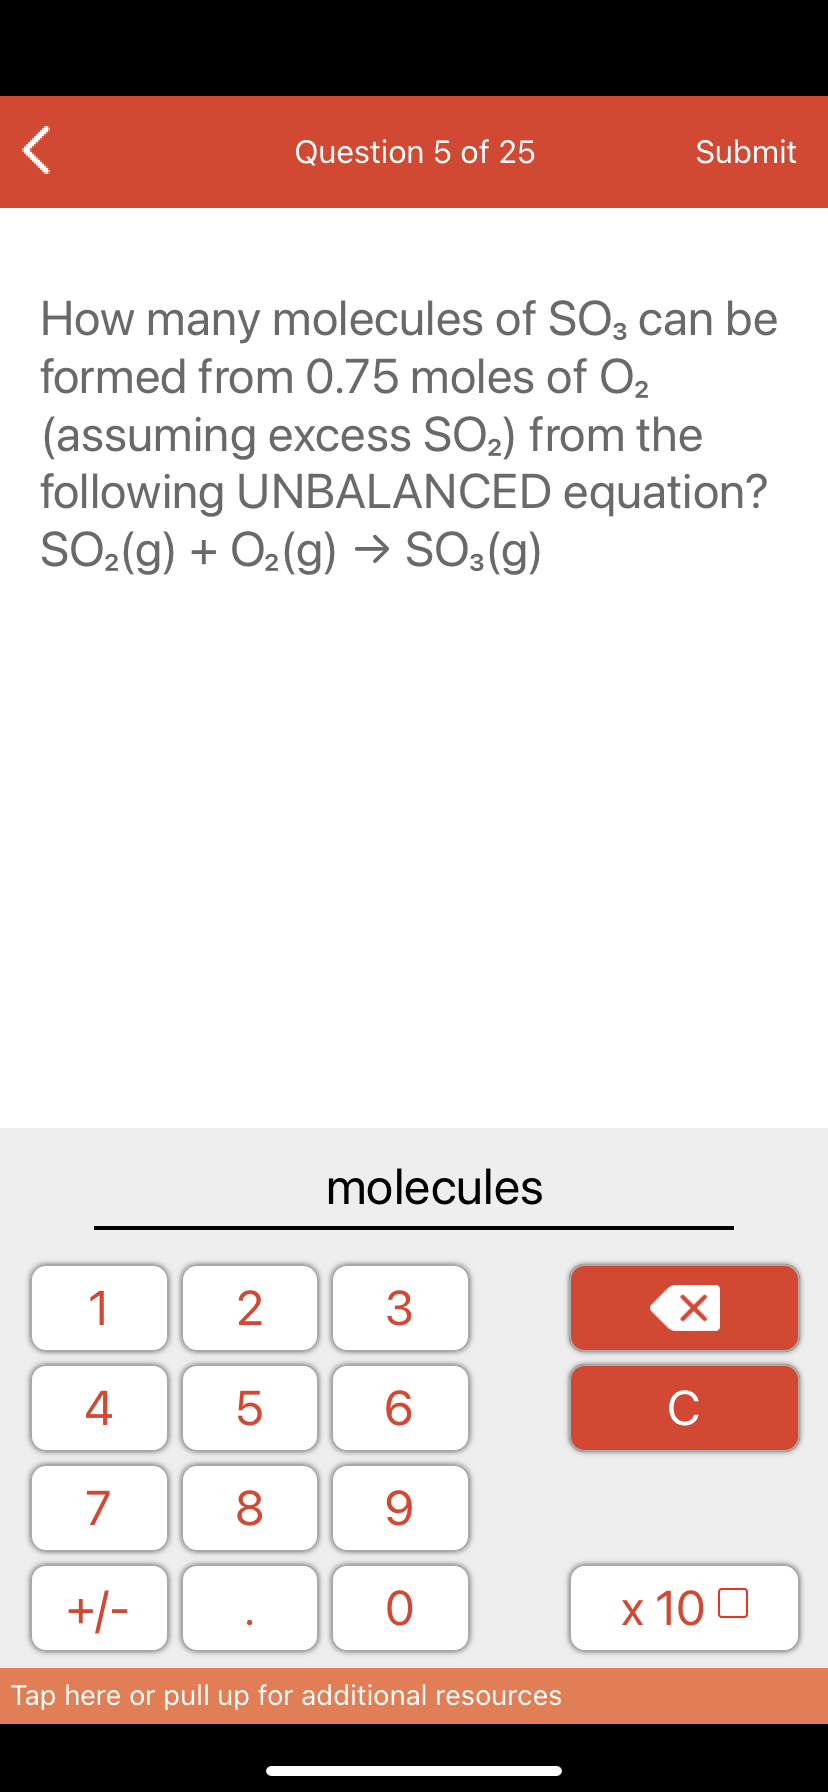 How many molecules of SO3 can be
formed from 0.75 moles of O2
(assuming excess SO2) from the
following UNBALANCED equation?
SO2(g) + O2(g) → SO3(g)
